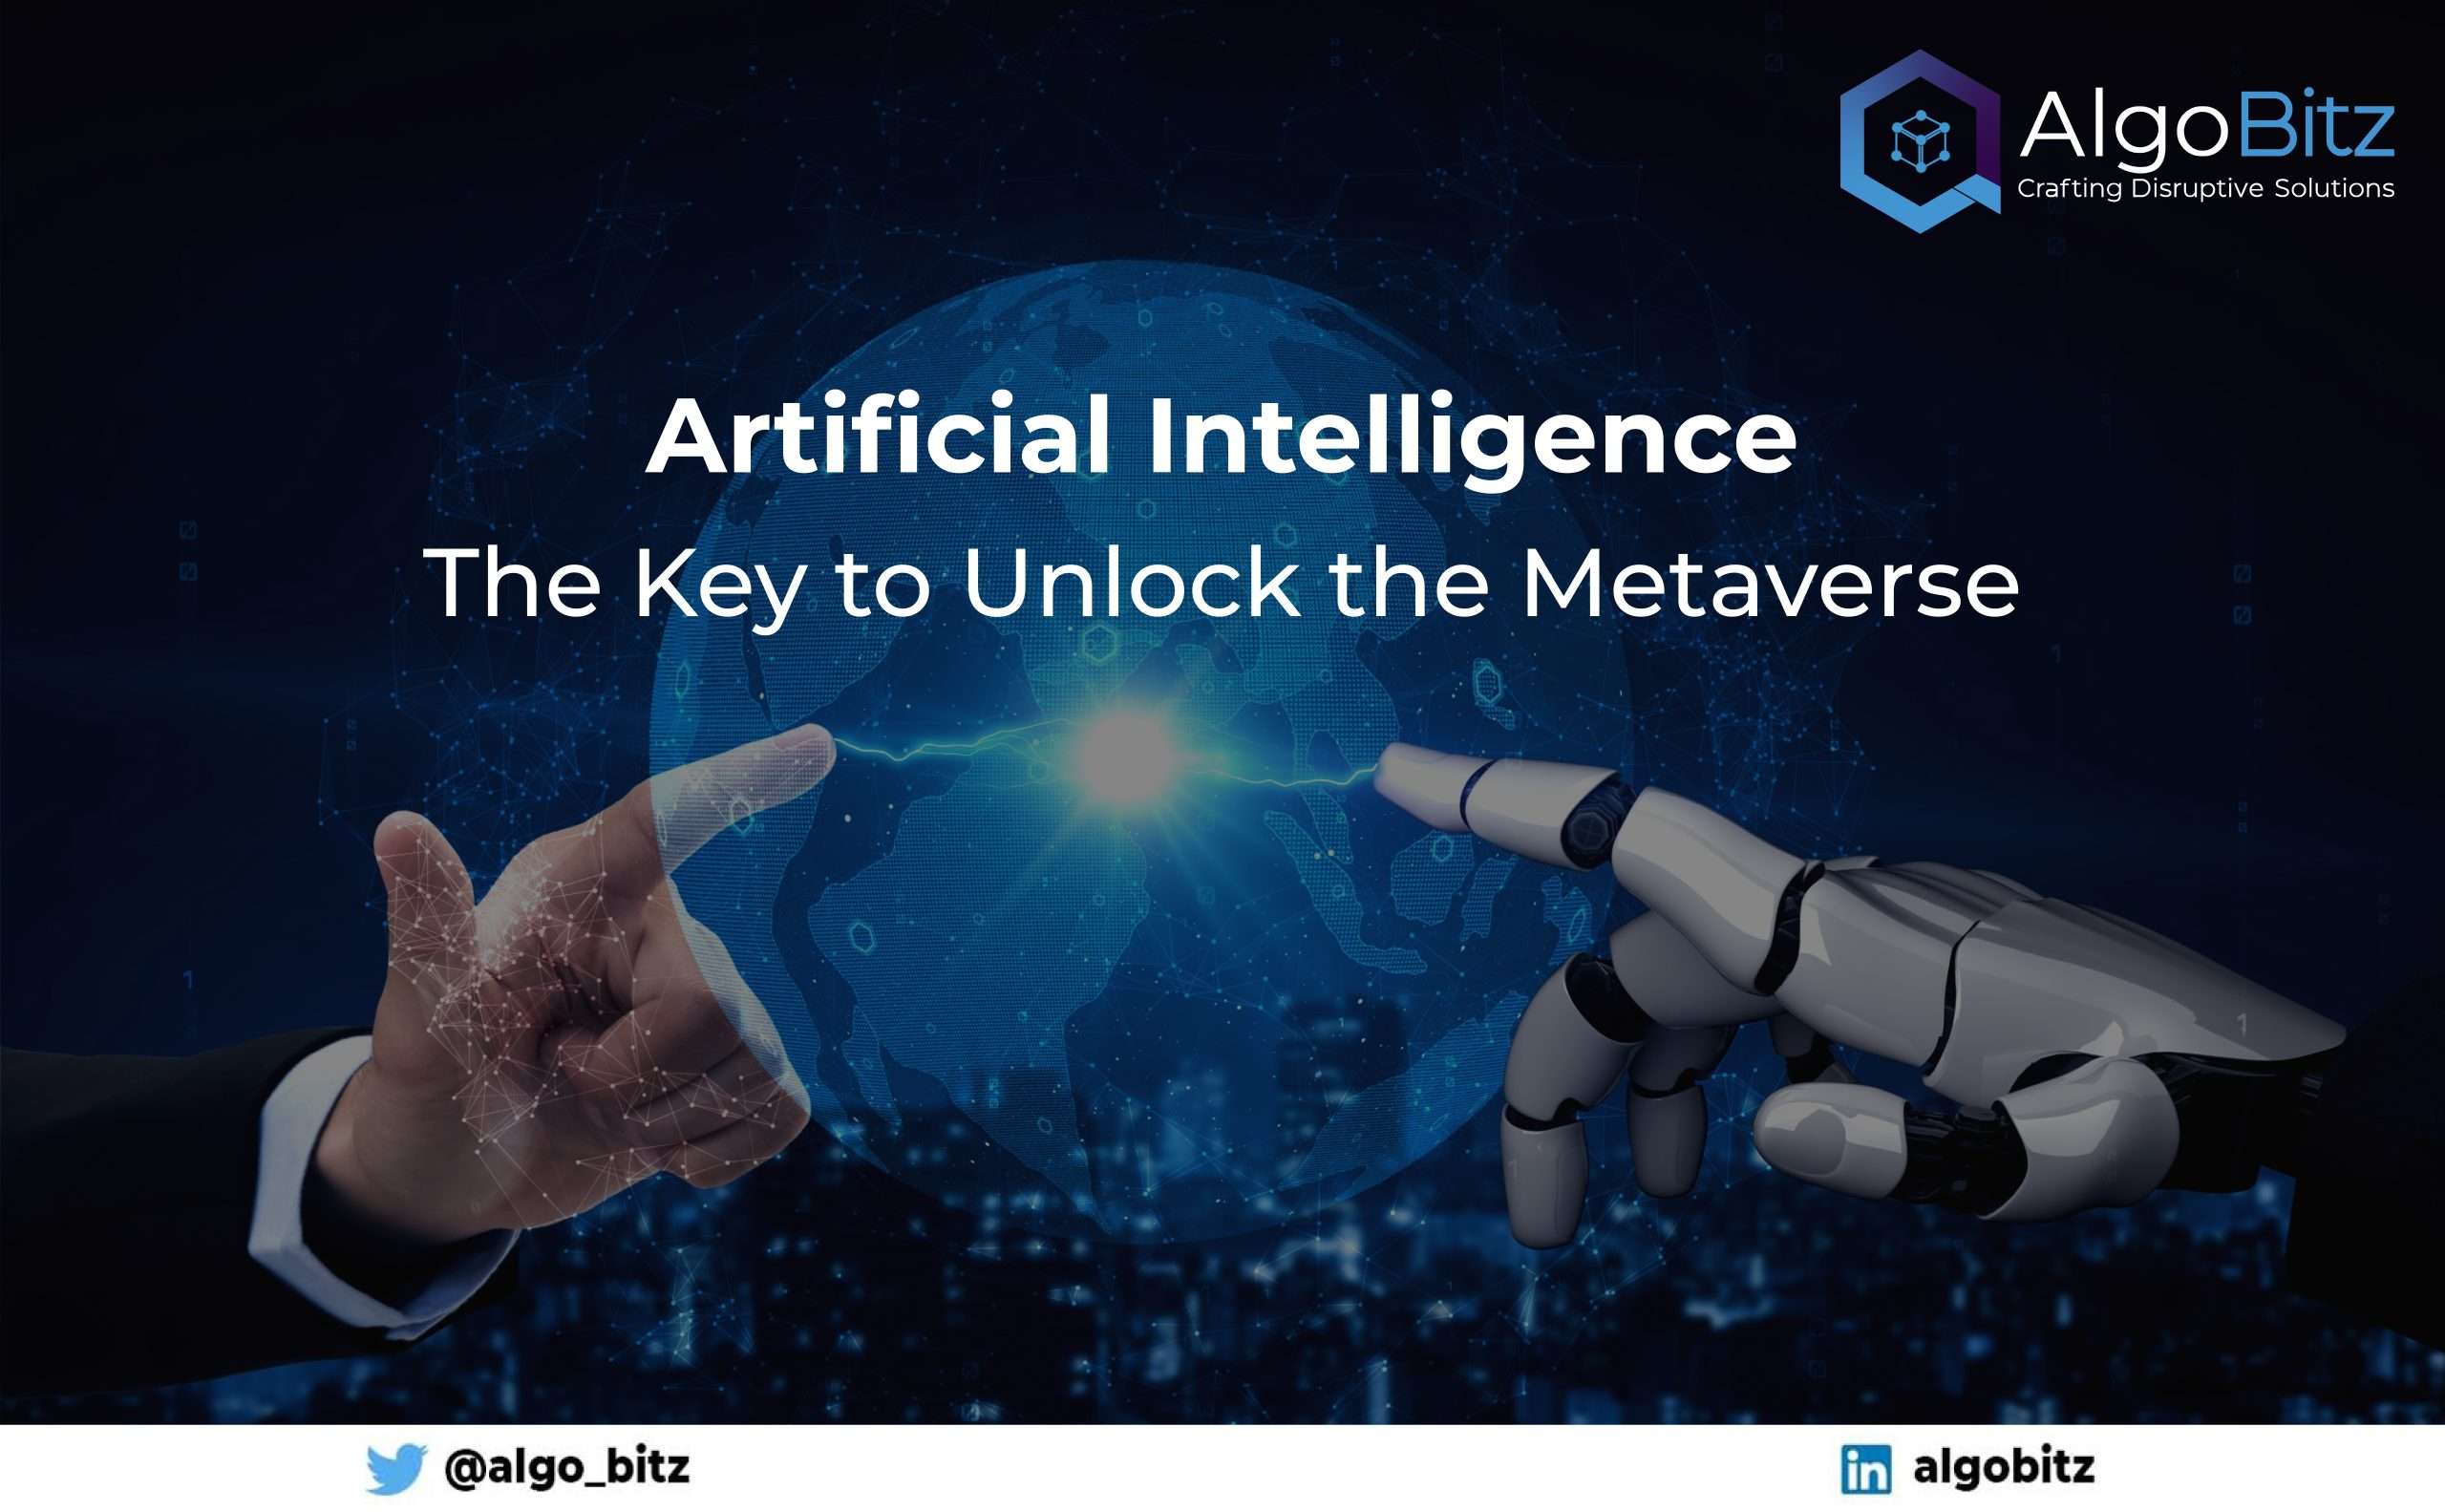 Artificial Intelligence is the Key to Unlock the Metaverse